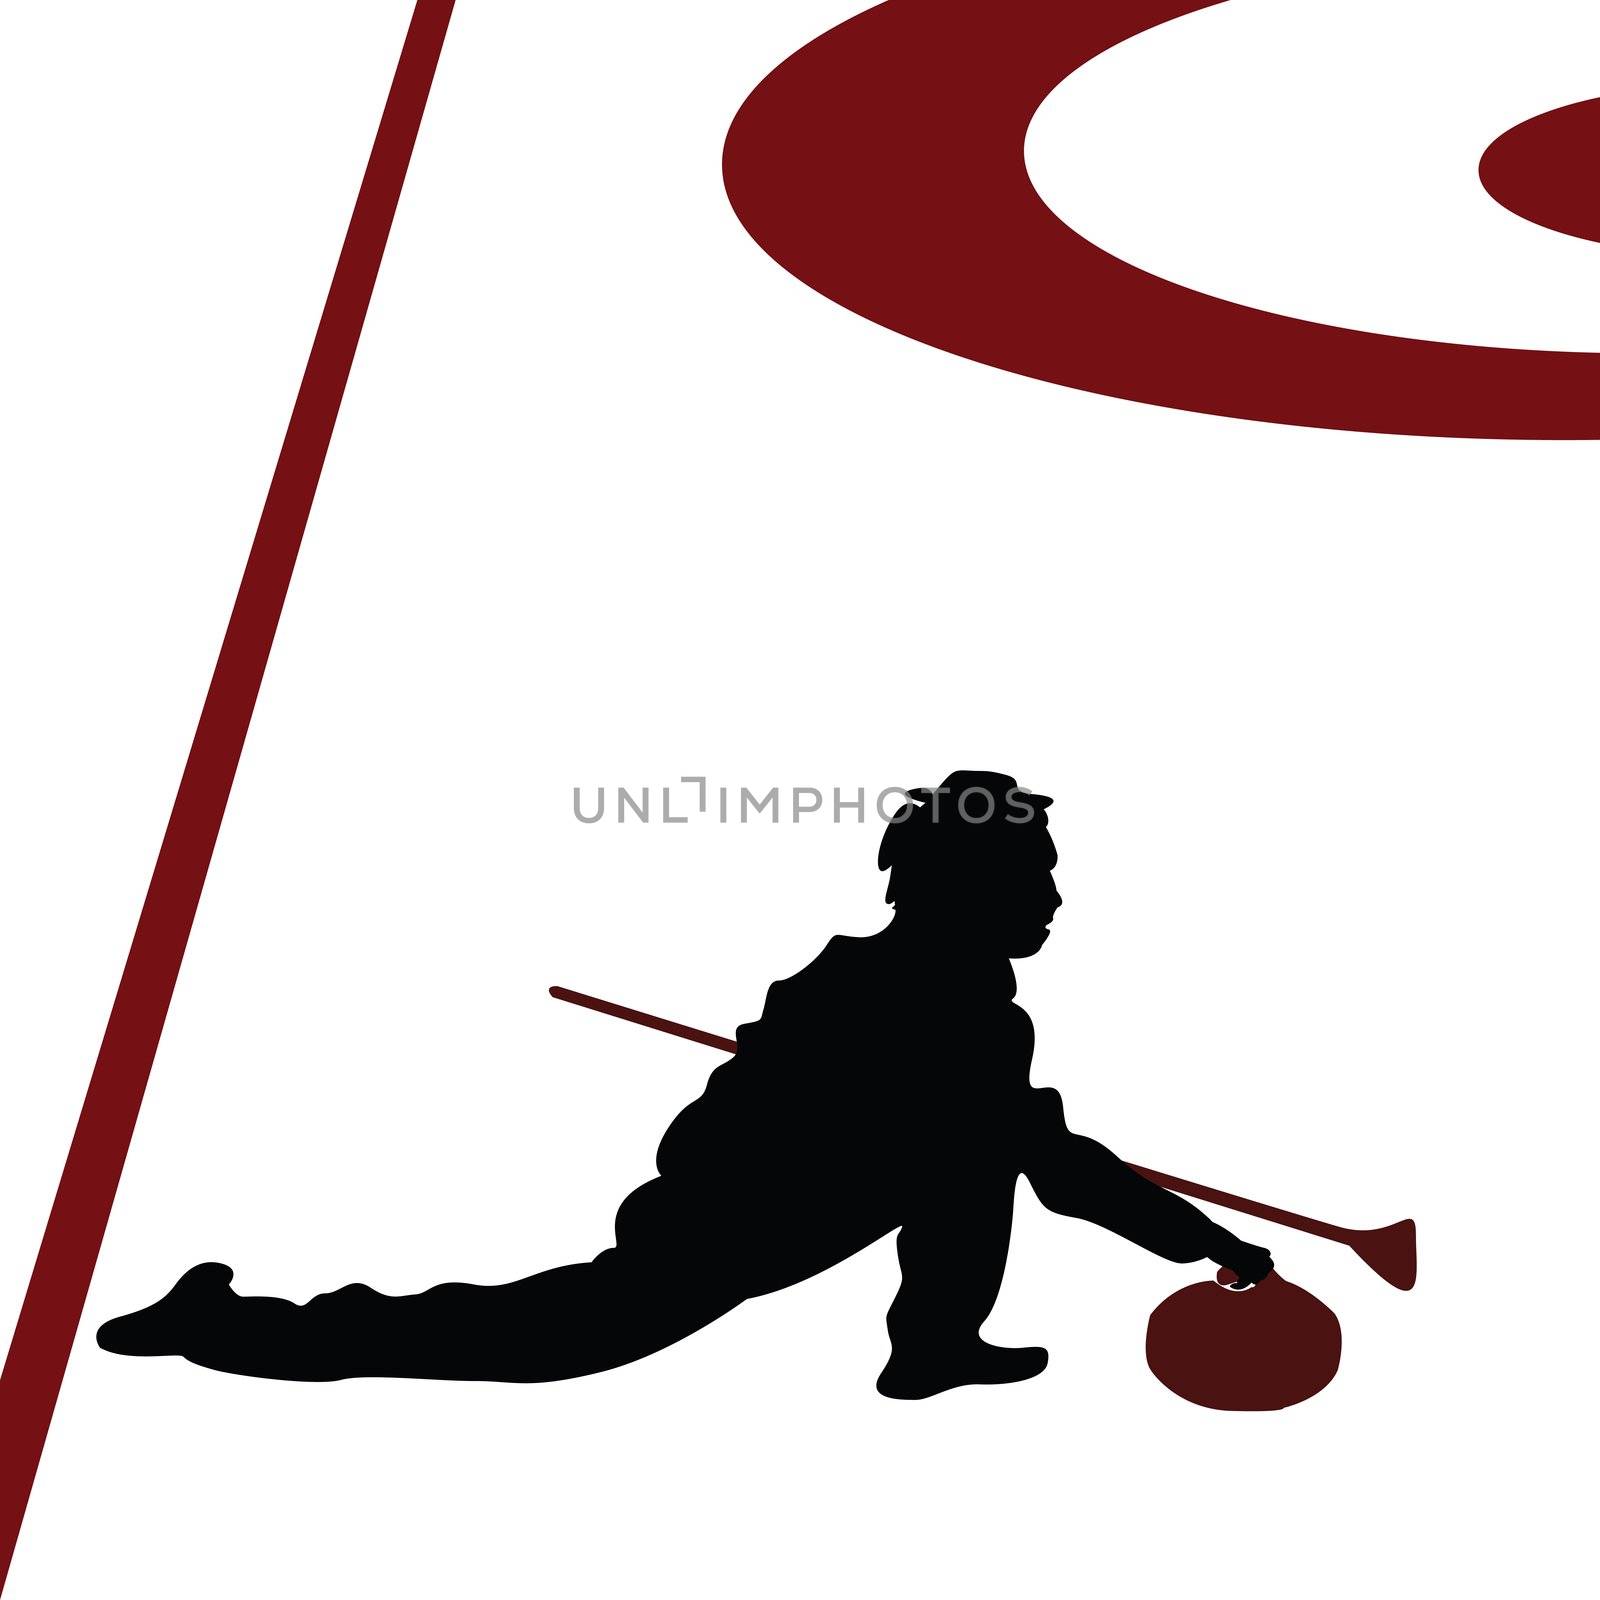 Curling player by Lirch